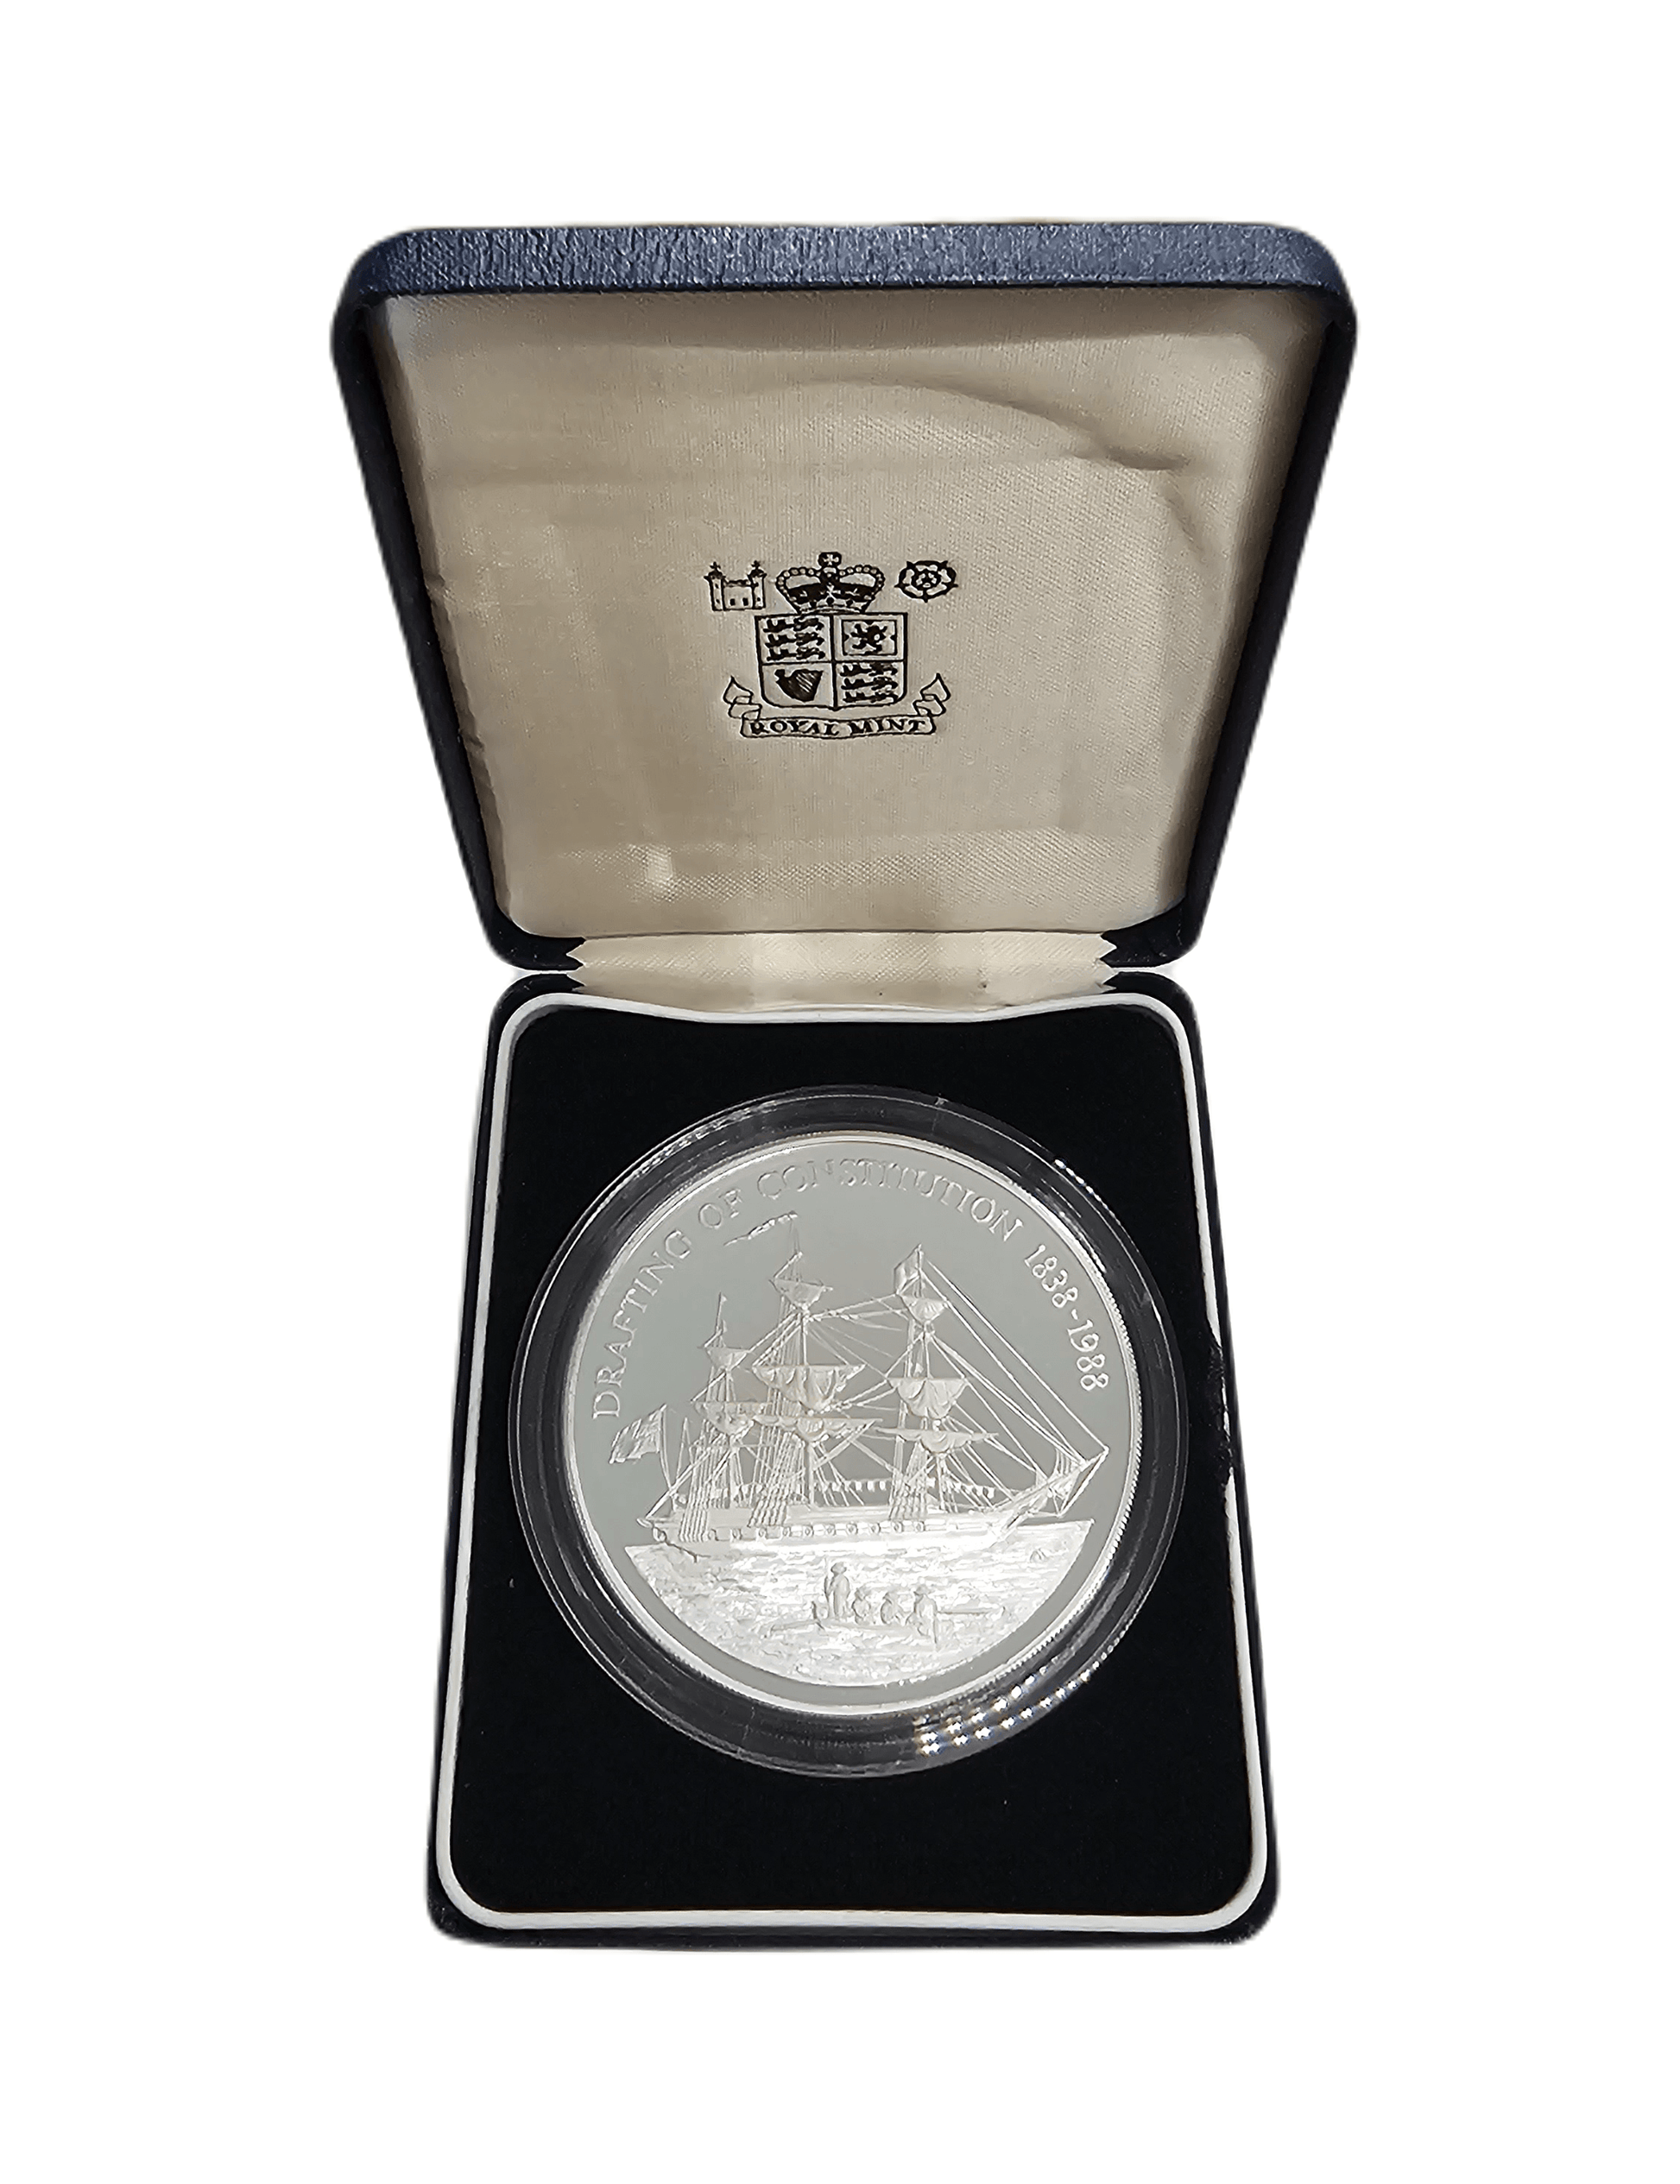 1988 Pitcairn Islands $50 5oz Silver Proof .999 Coin - 150th Anniversary Drafting of Constitution - Loose Change Coins